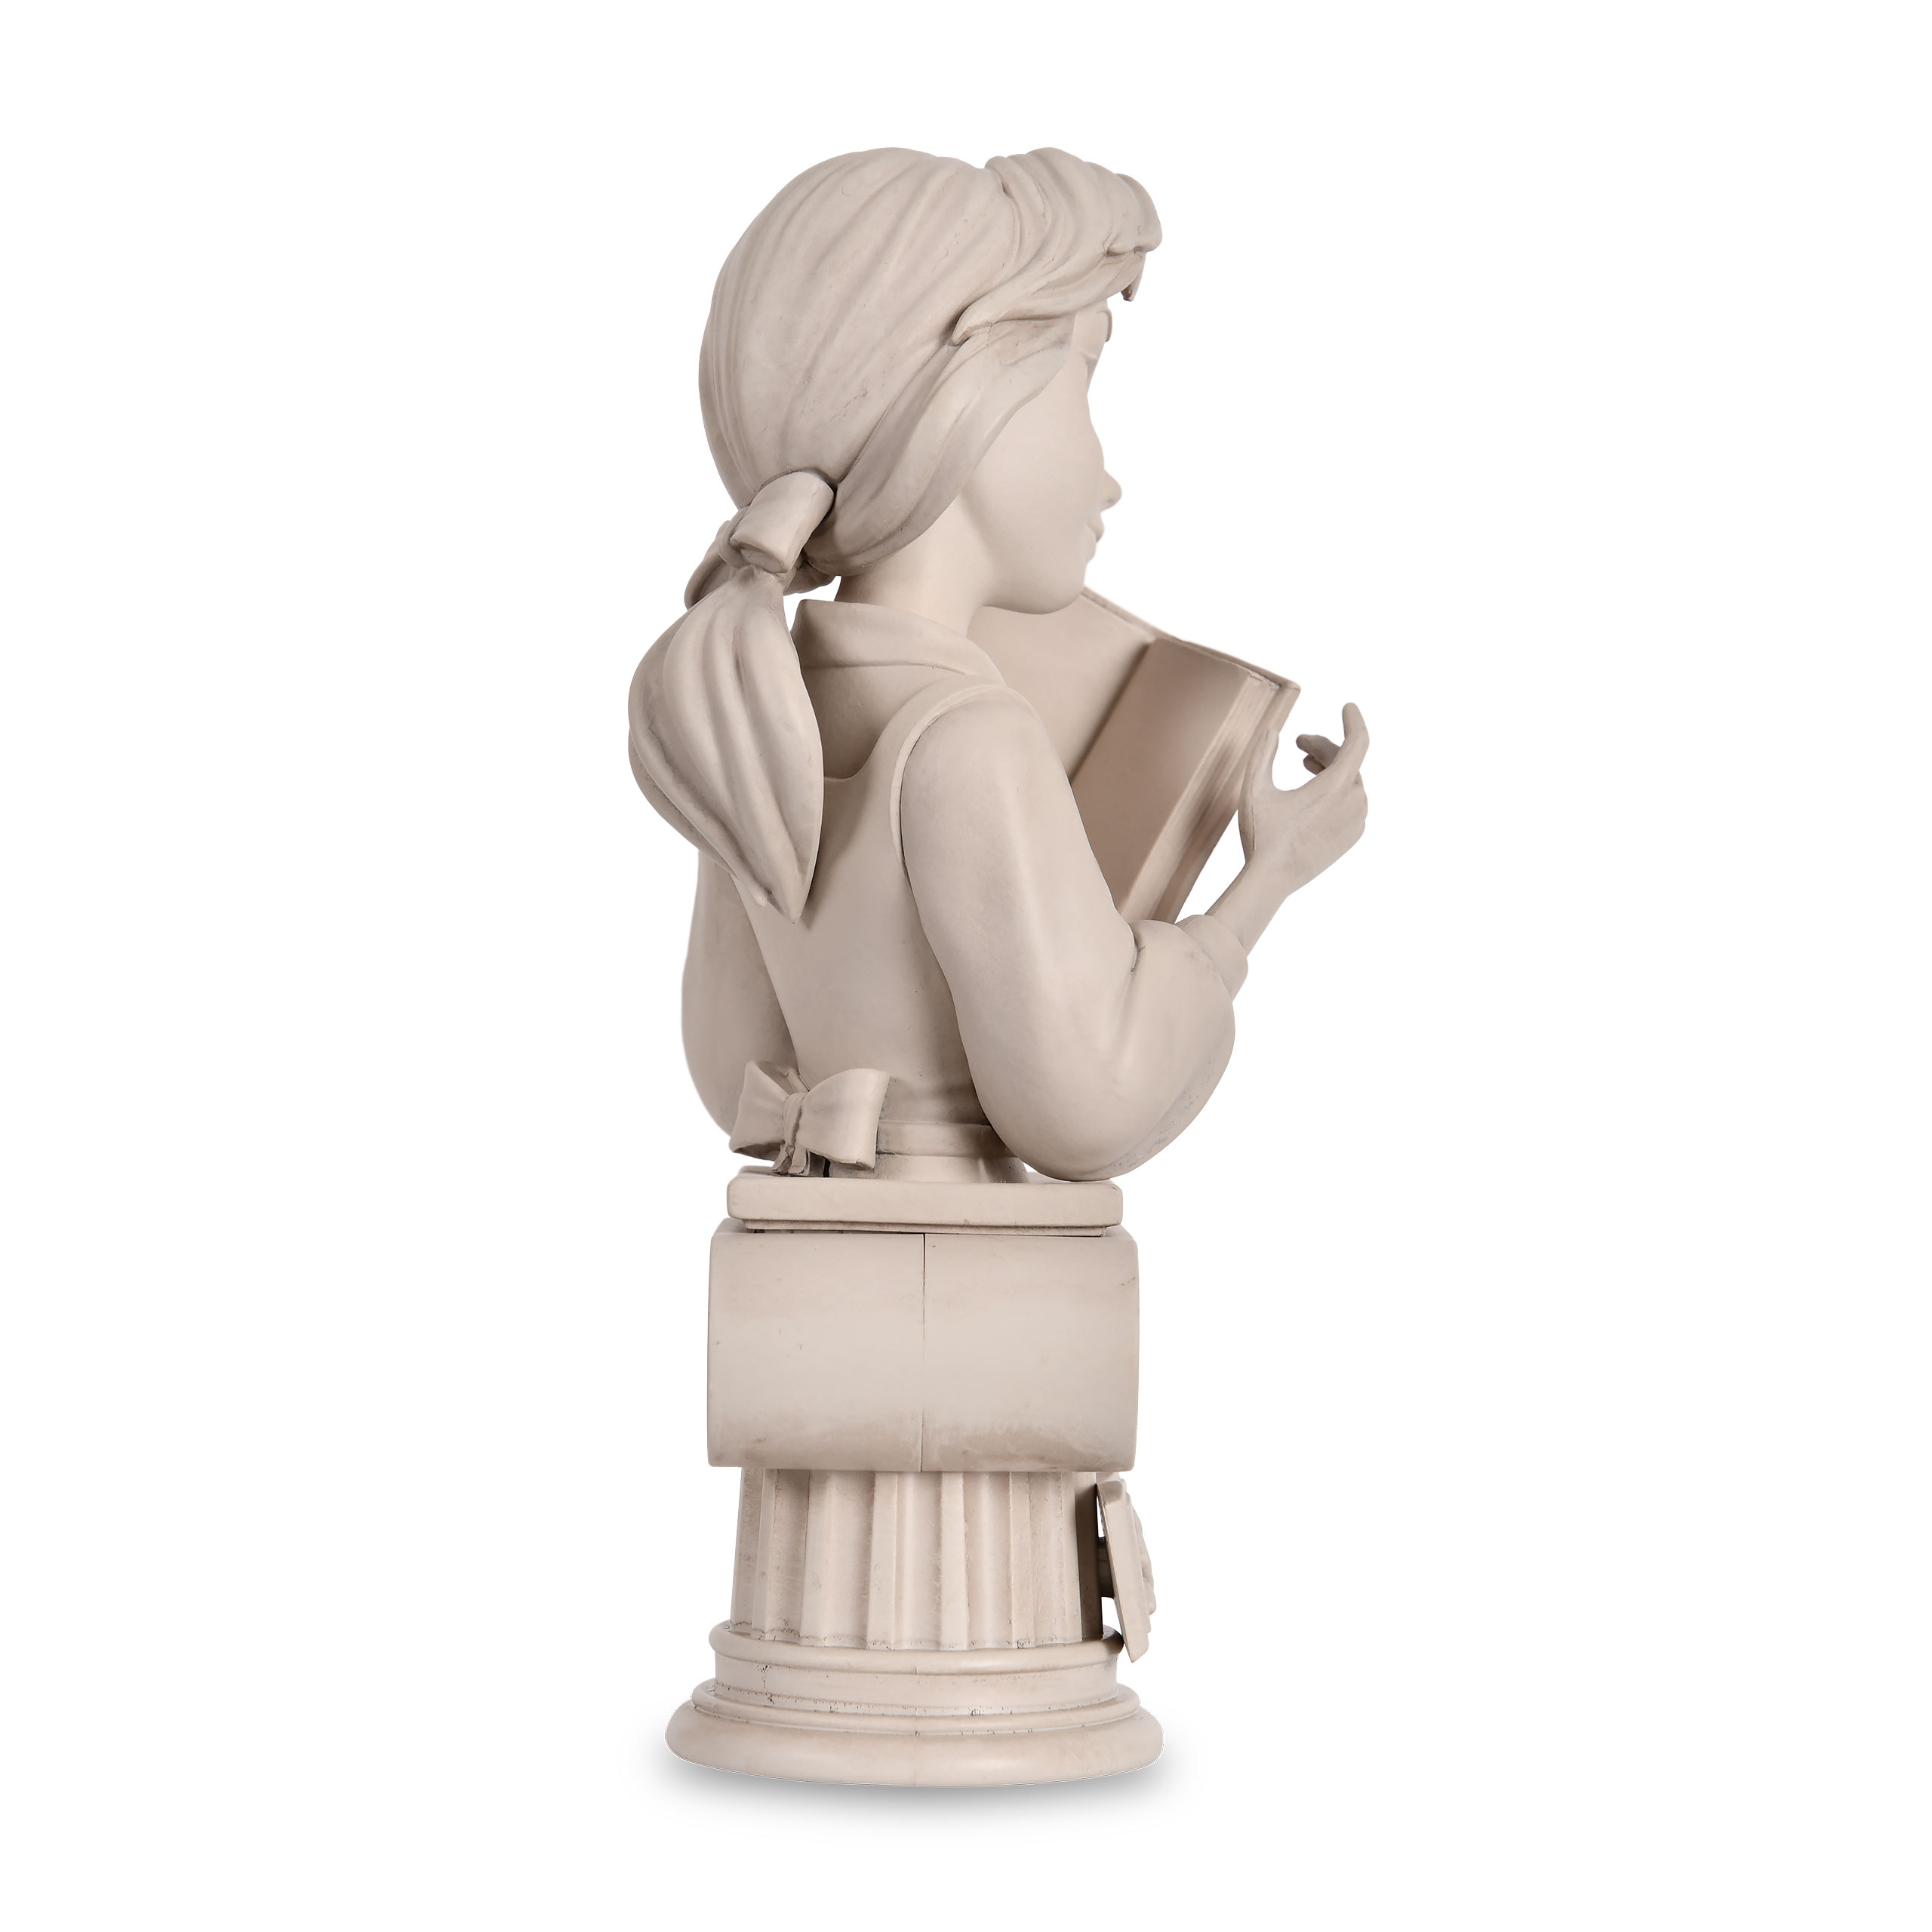 Beauty and the Beast - Belle Disney Princess Bust